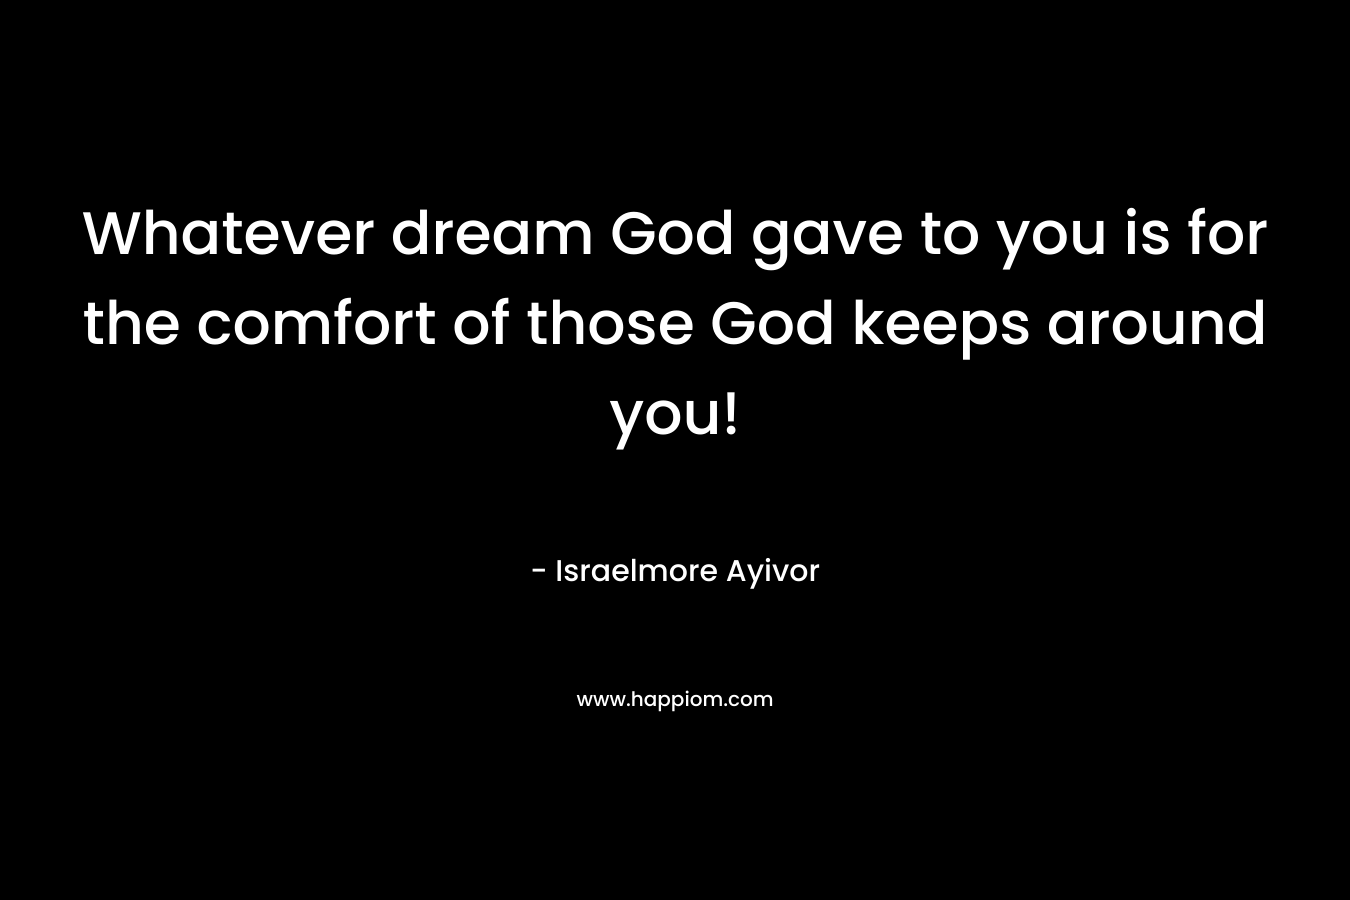 Whatever dream God gave to you is for the comfort of those God keeps around you!